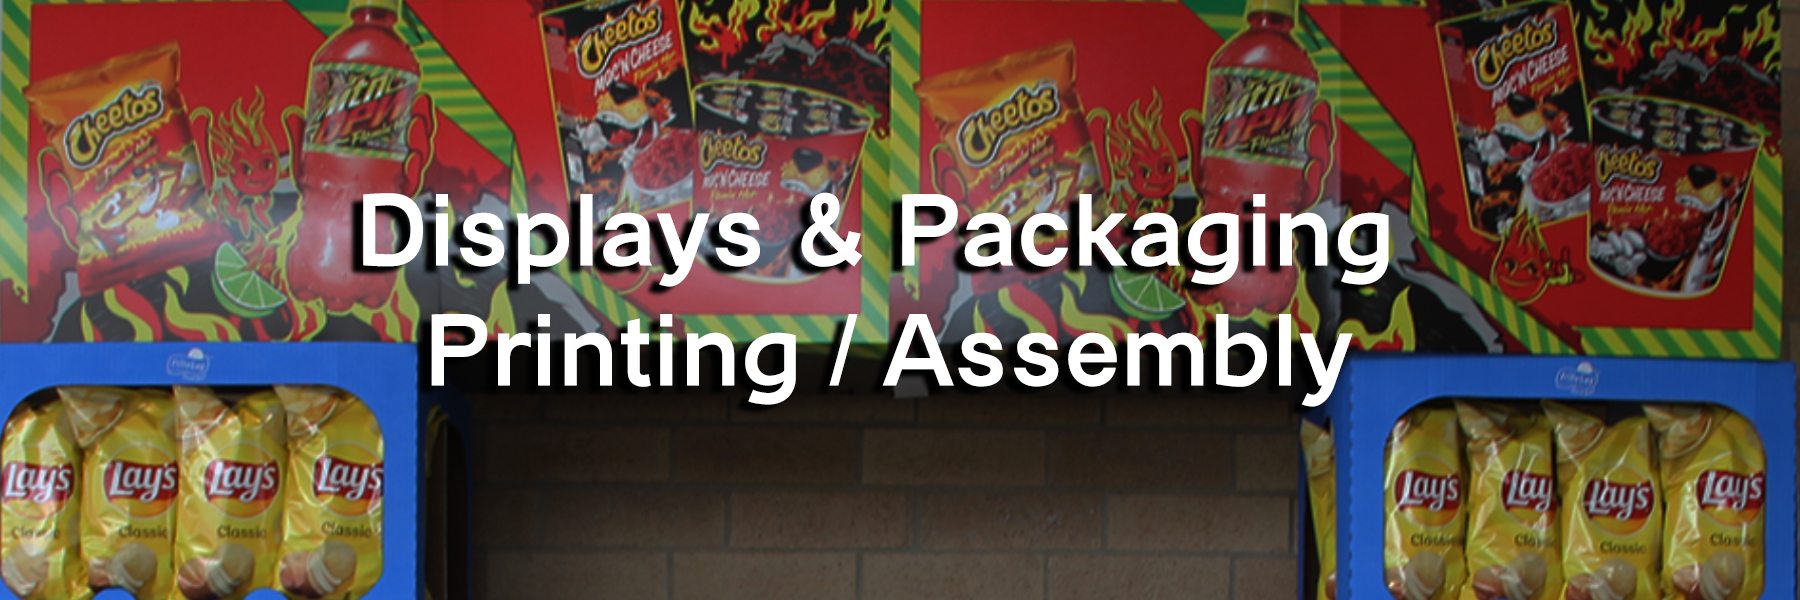 Custom Printed Cardboard Product Display Printing and Assembly